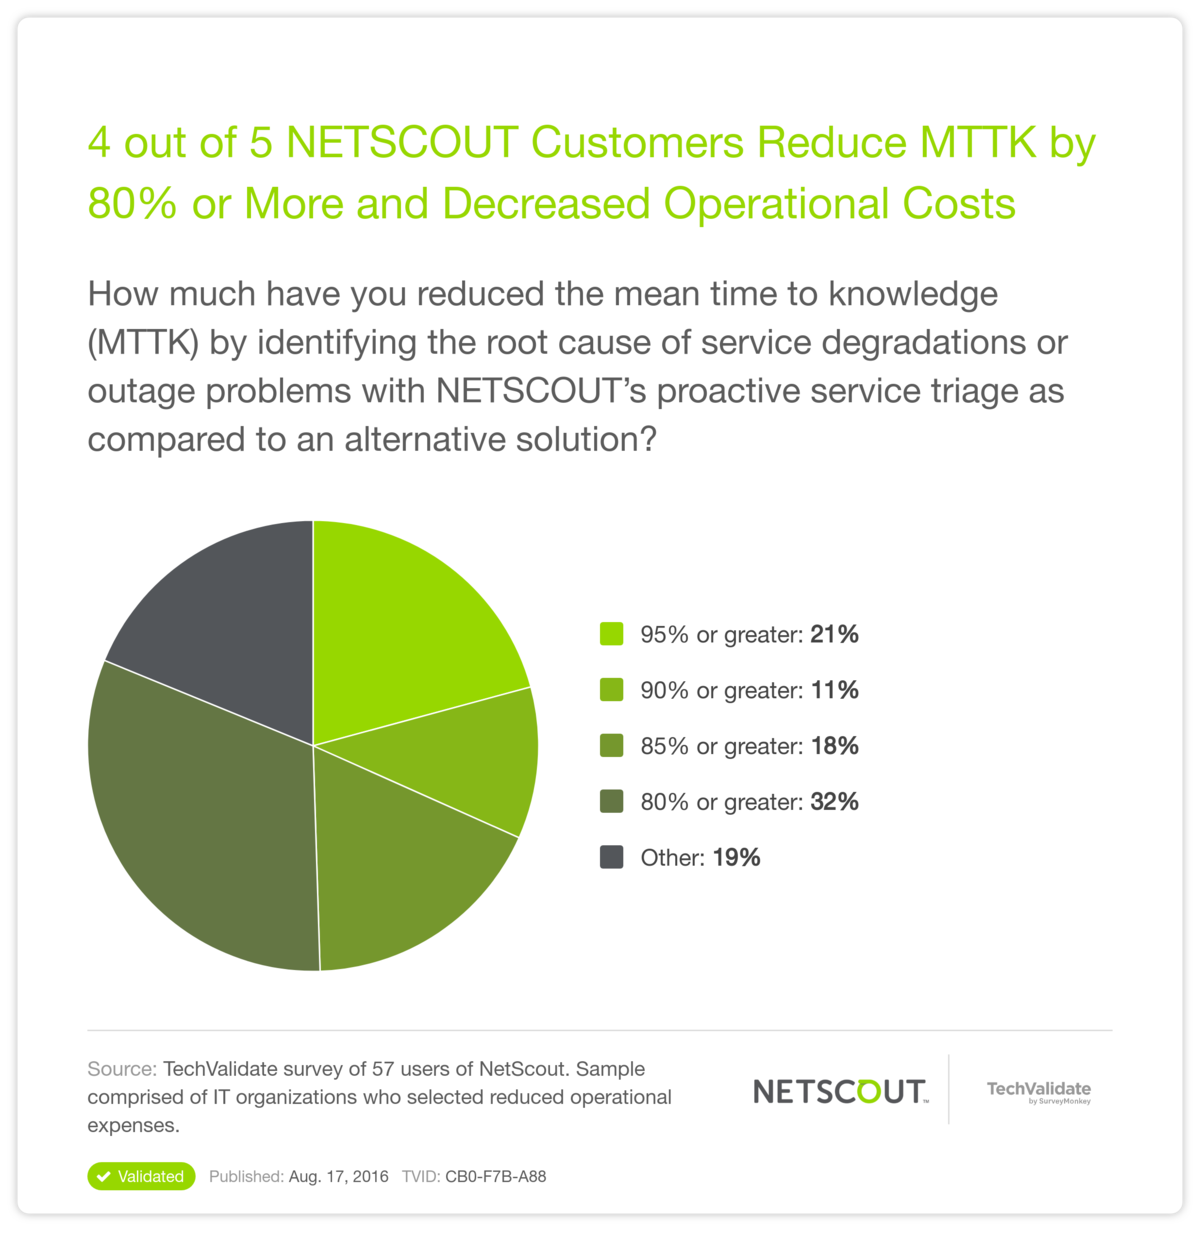 4 out of 5 NETSCOUT Customers Reduce MTTK by 80% or More and Decreased Operational Costs